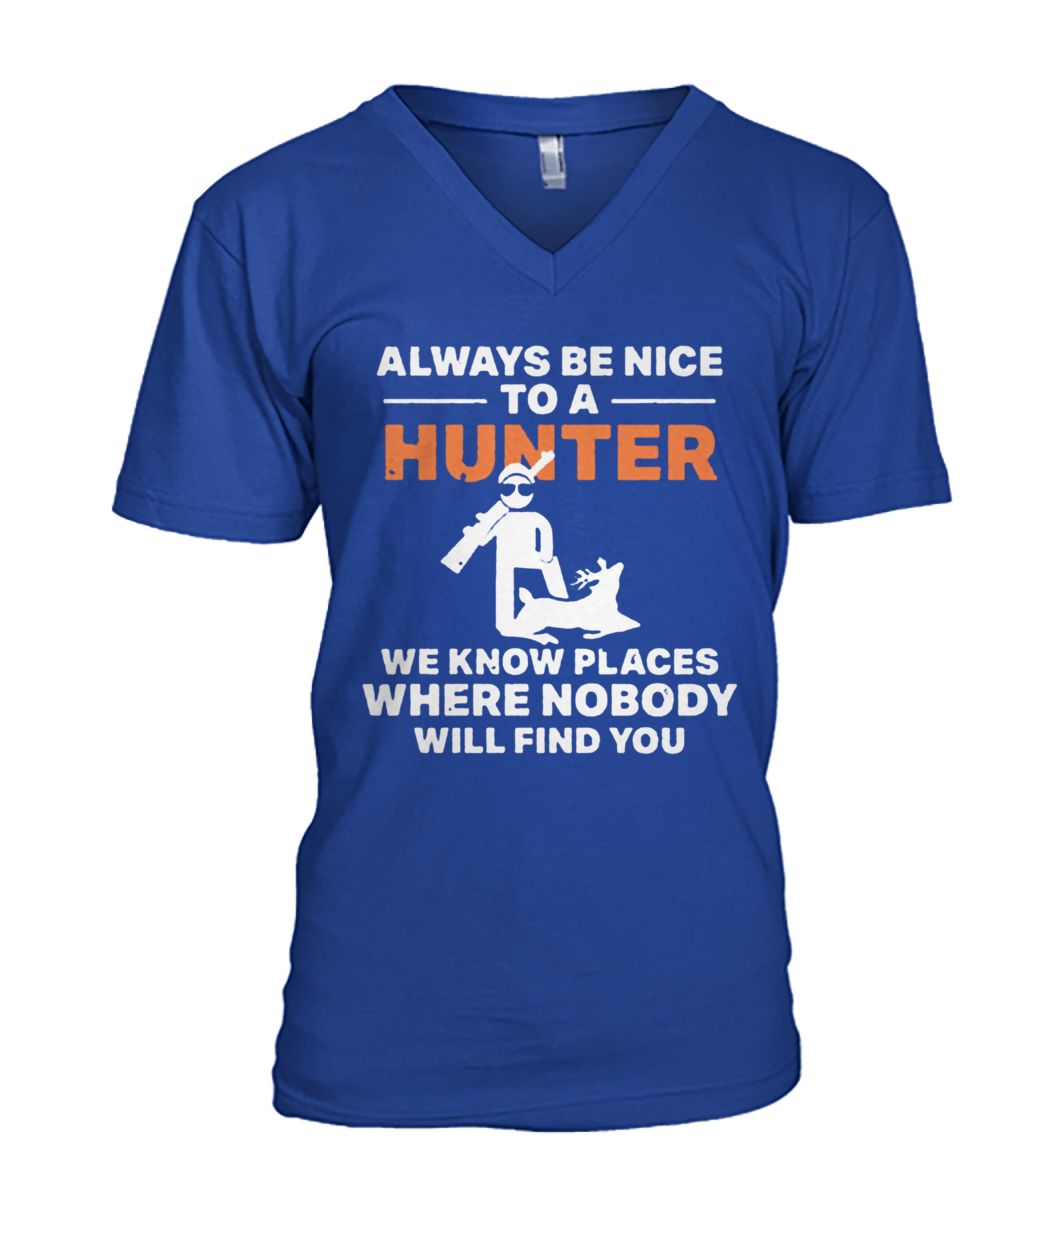 Always be nice to a hunter we know places where nobody will find you mens v-neck